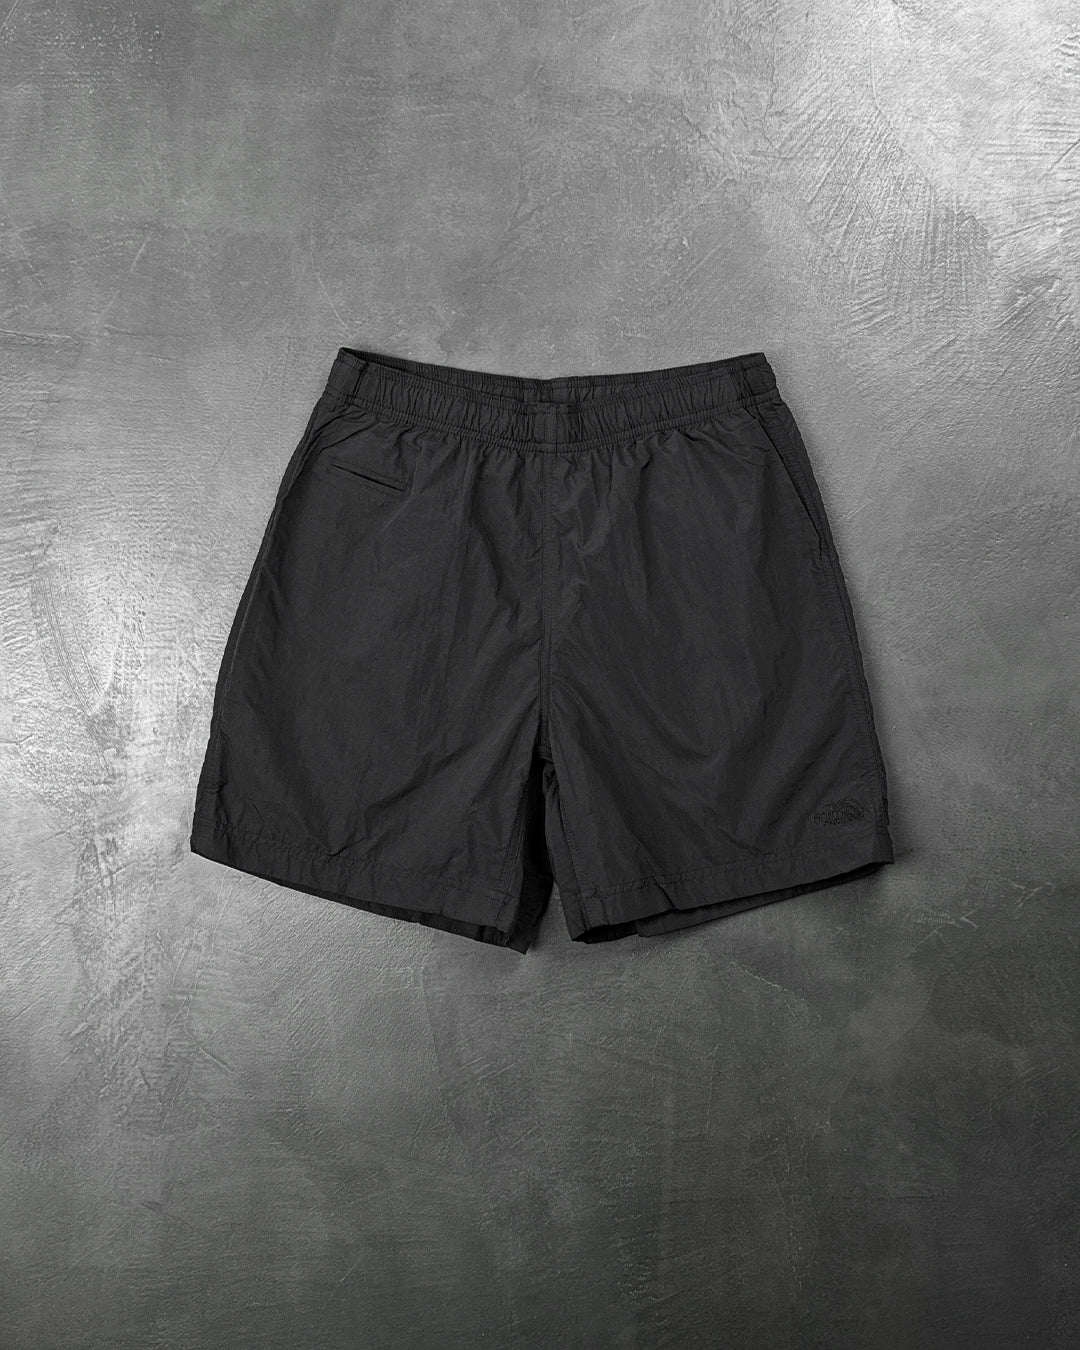 Beams x The North Face Mountain Field Shorts Black